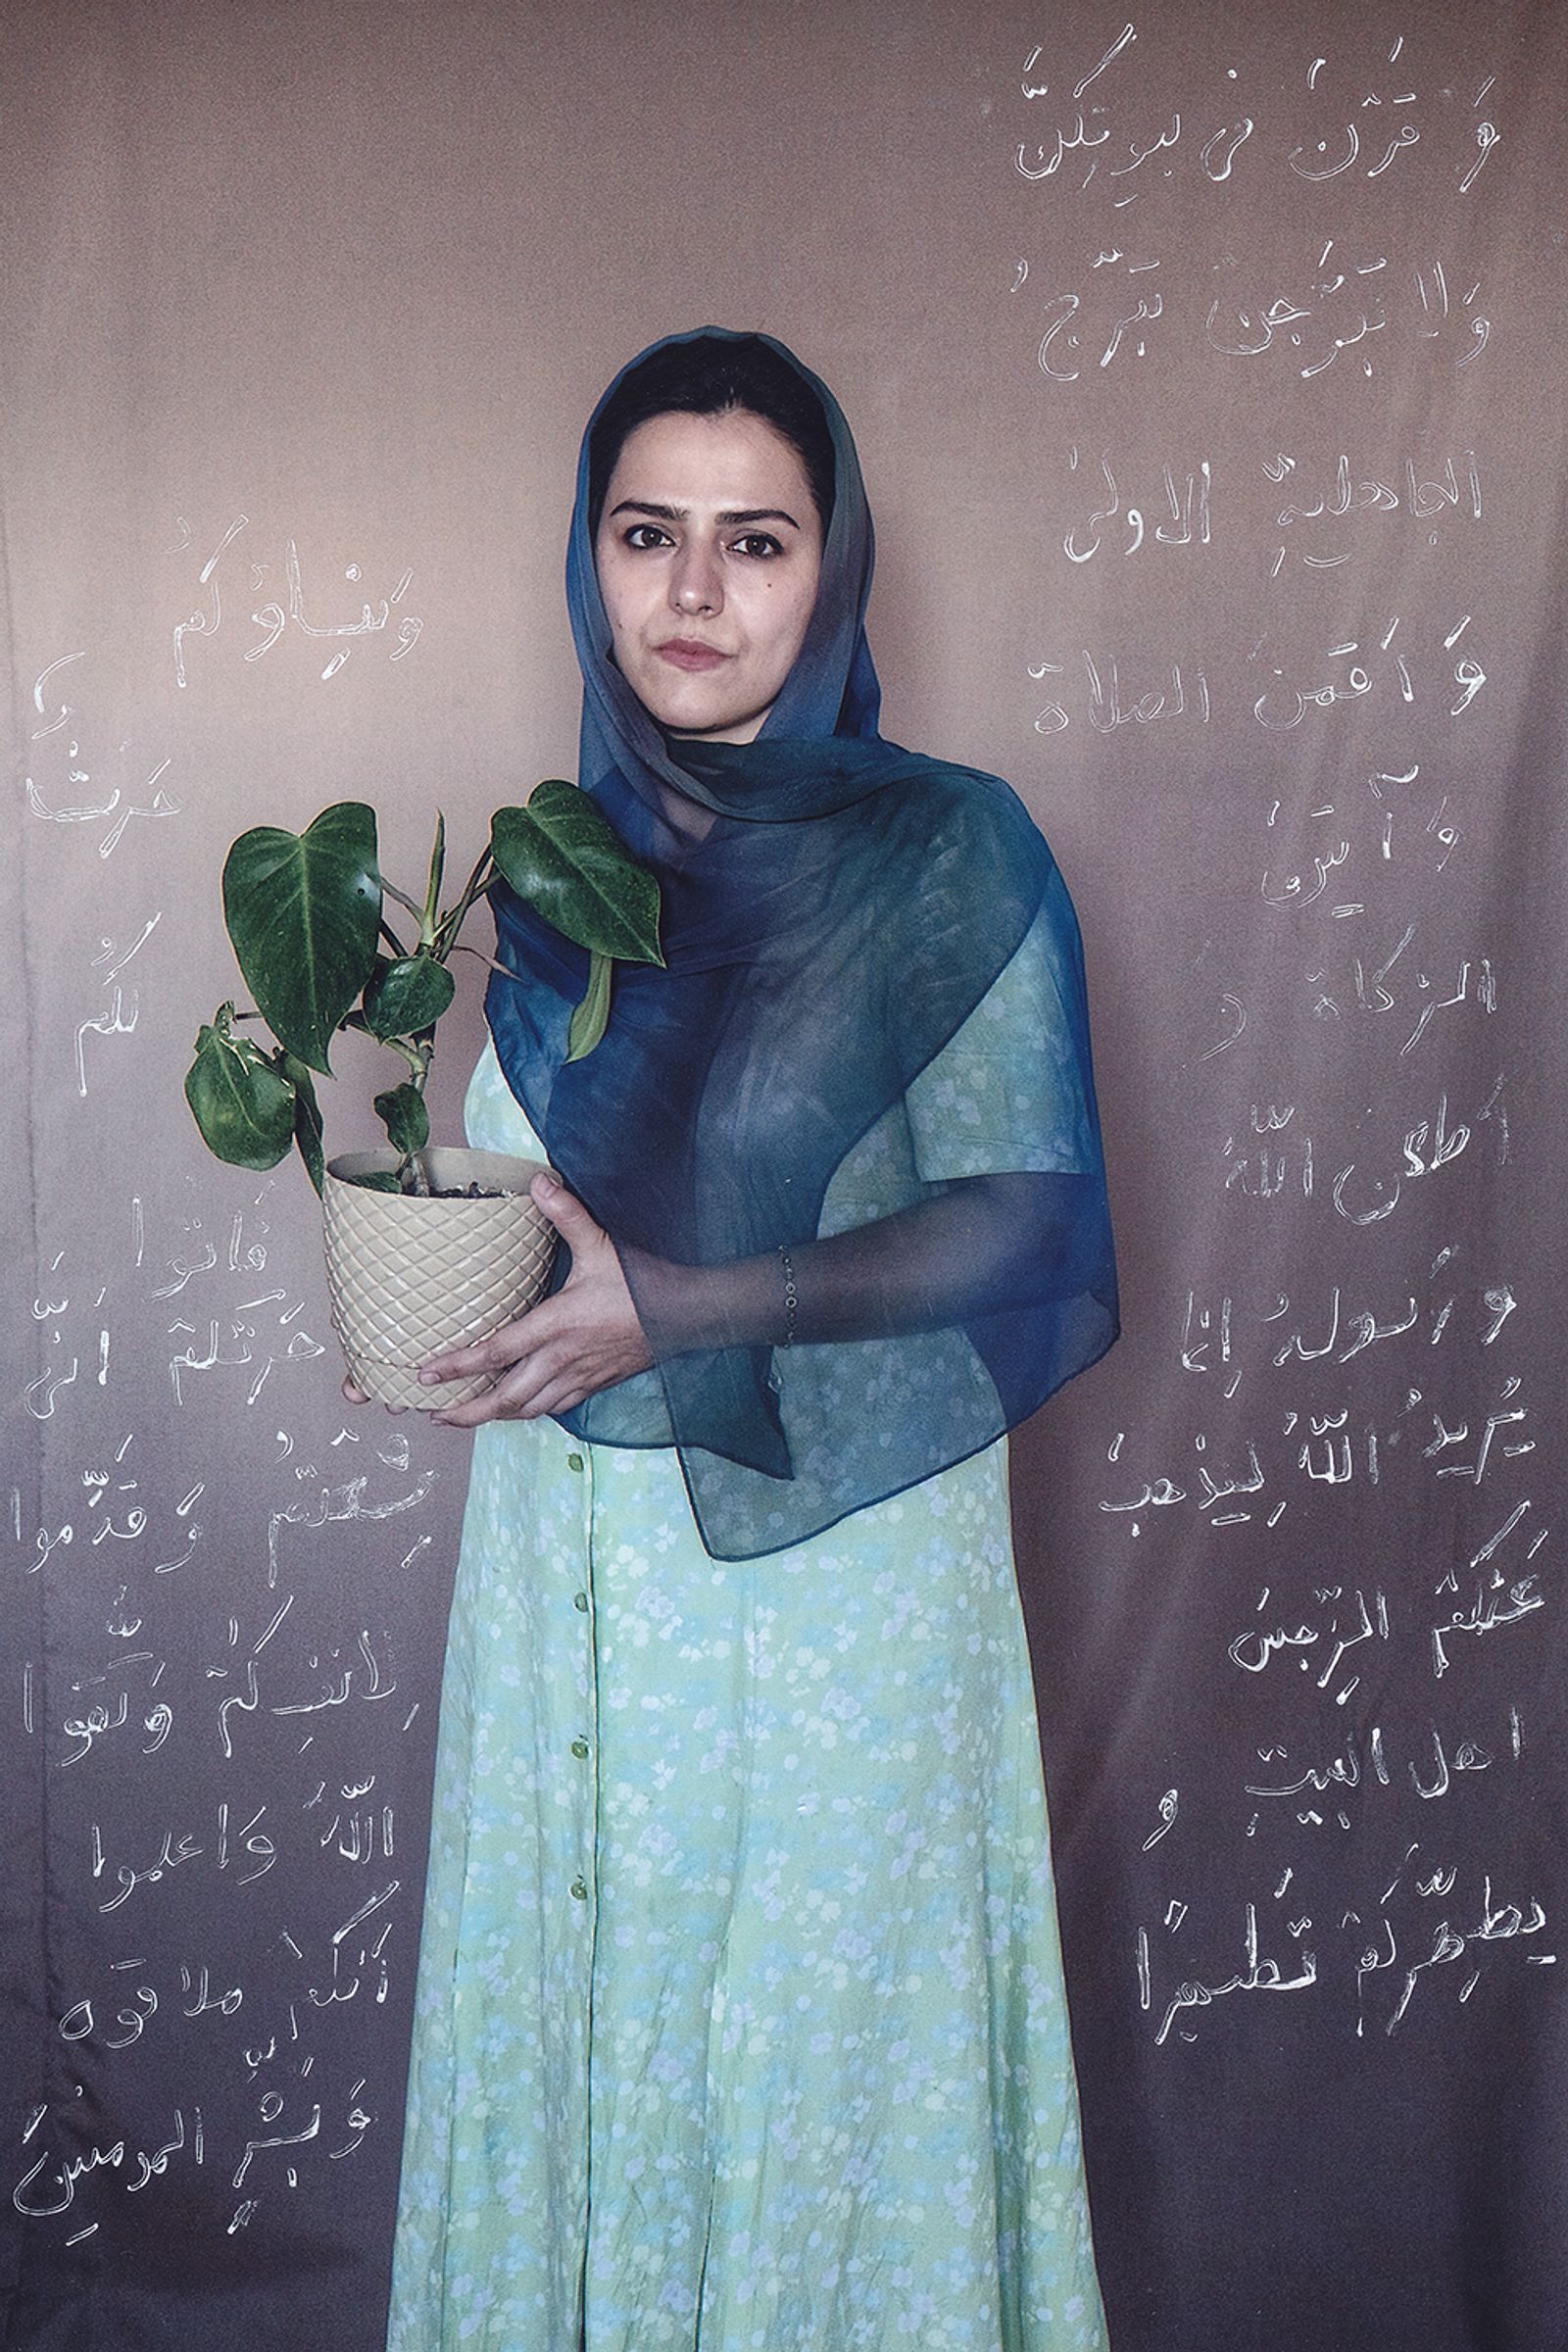 © sima choubdarzadeh - Image from the My name is fear photography project